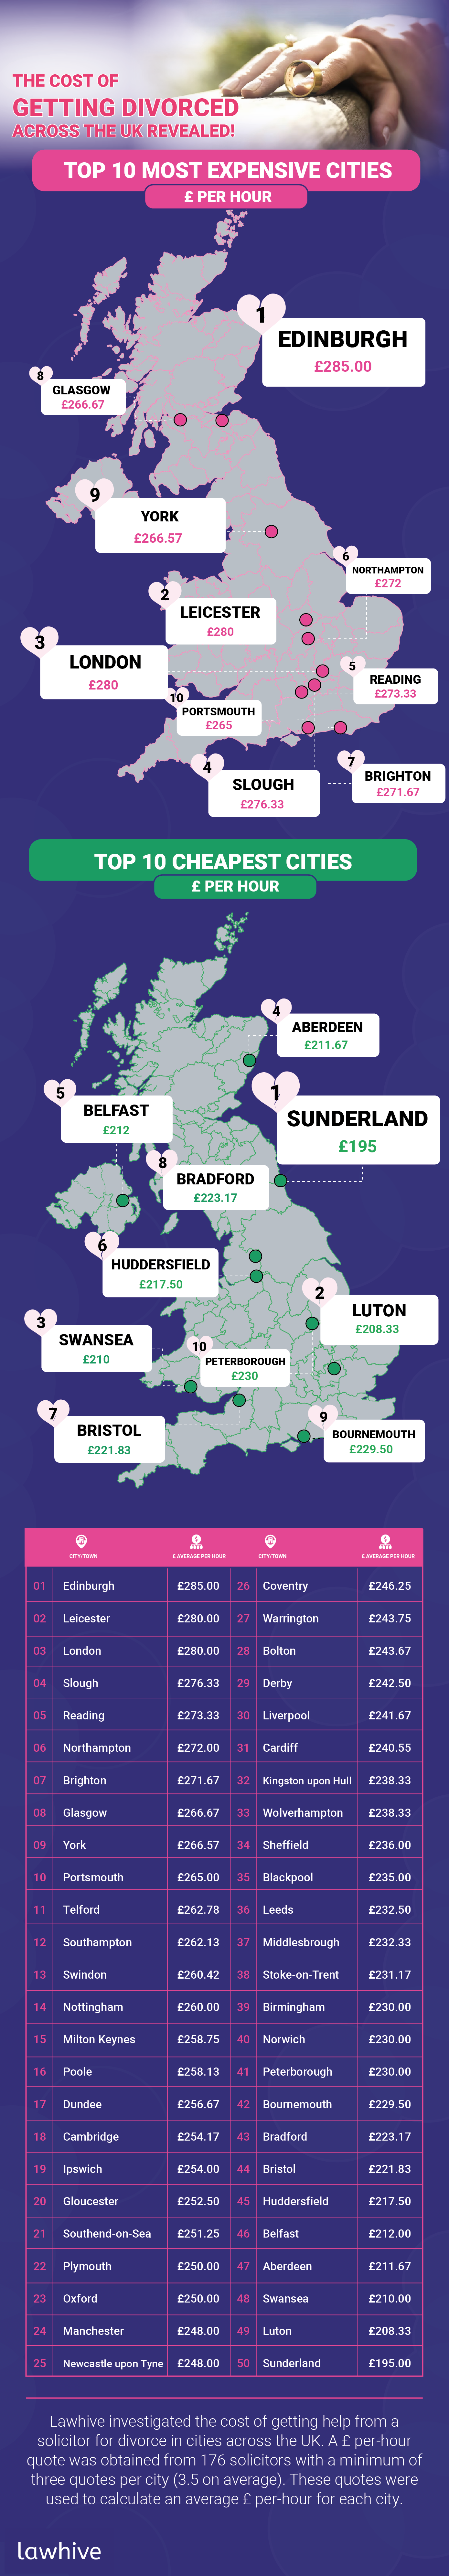 Cost of Divorce Across the Top 50 Largest UK Cities